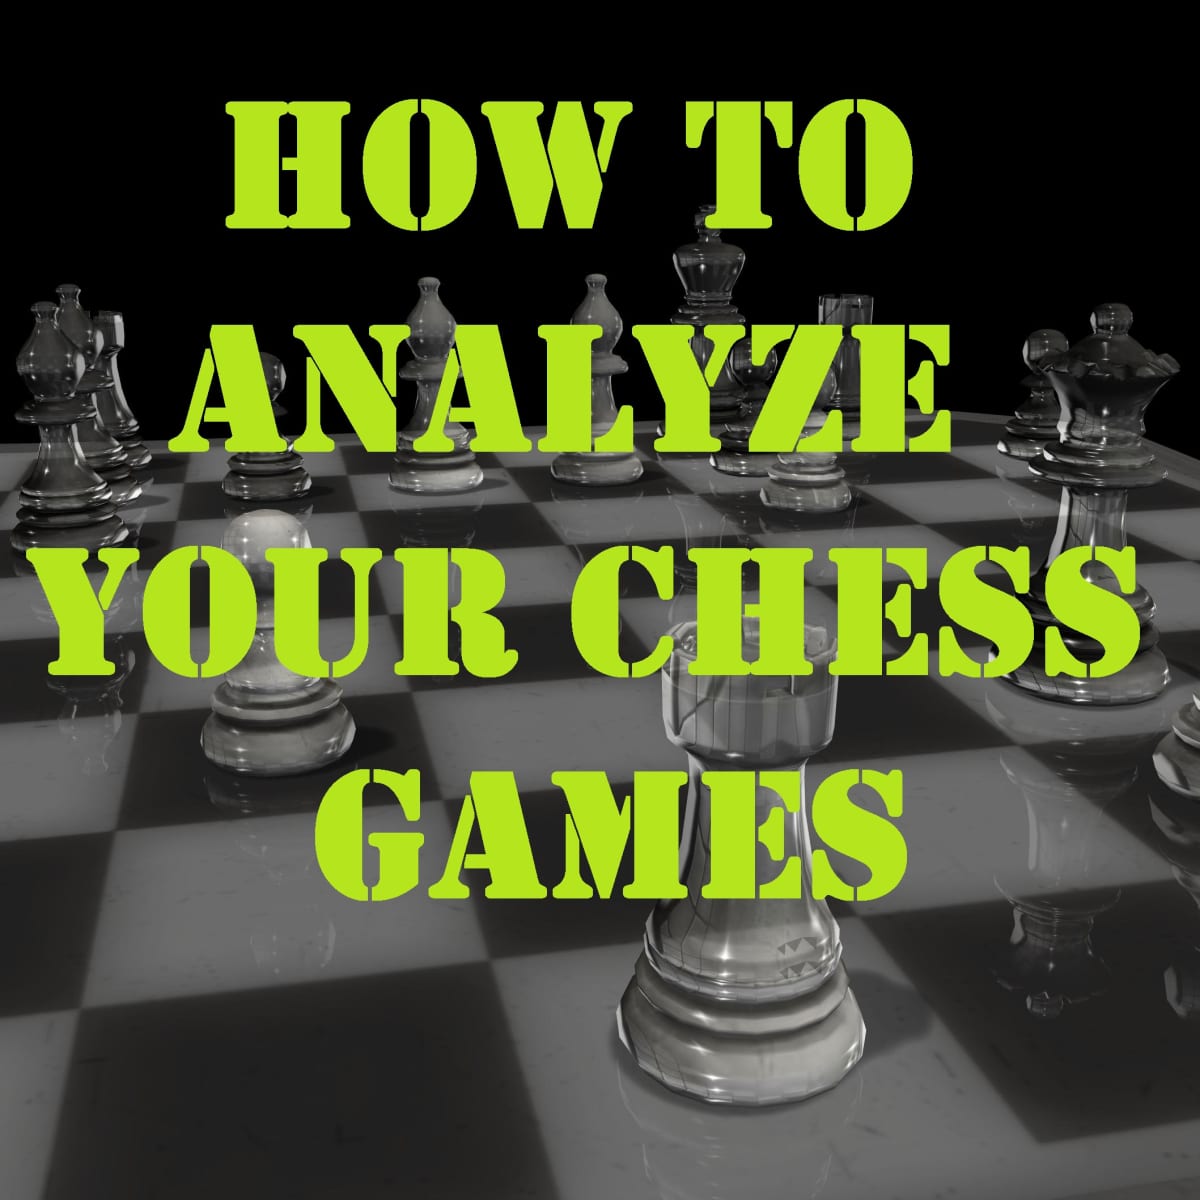 Chess.com Support on X: Studying your games in the Explorer is HUGE in  identifying opening lines you can improve. You will see common trends in  your games, and with a little analysis